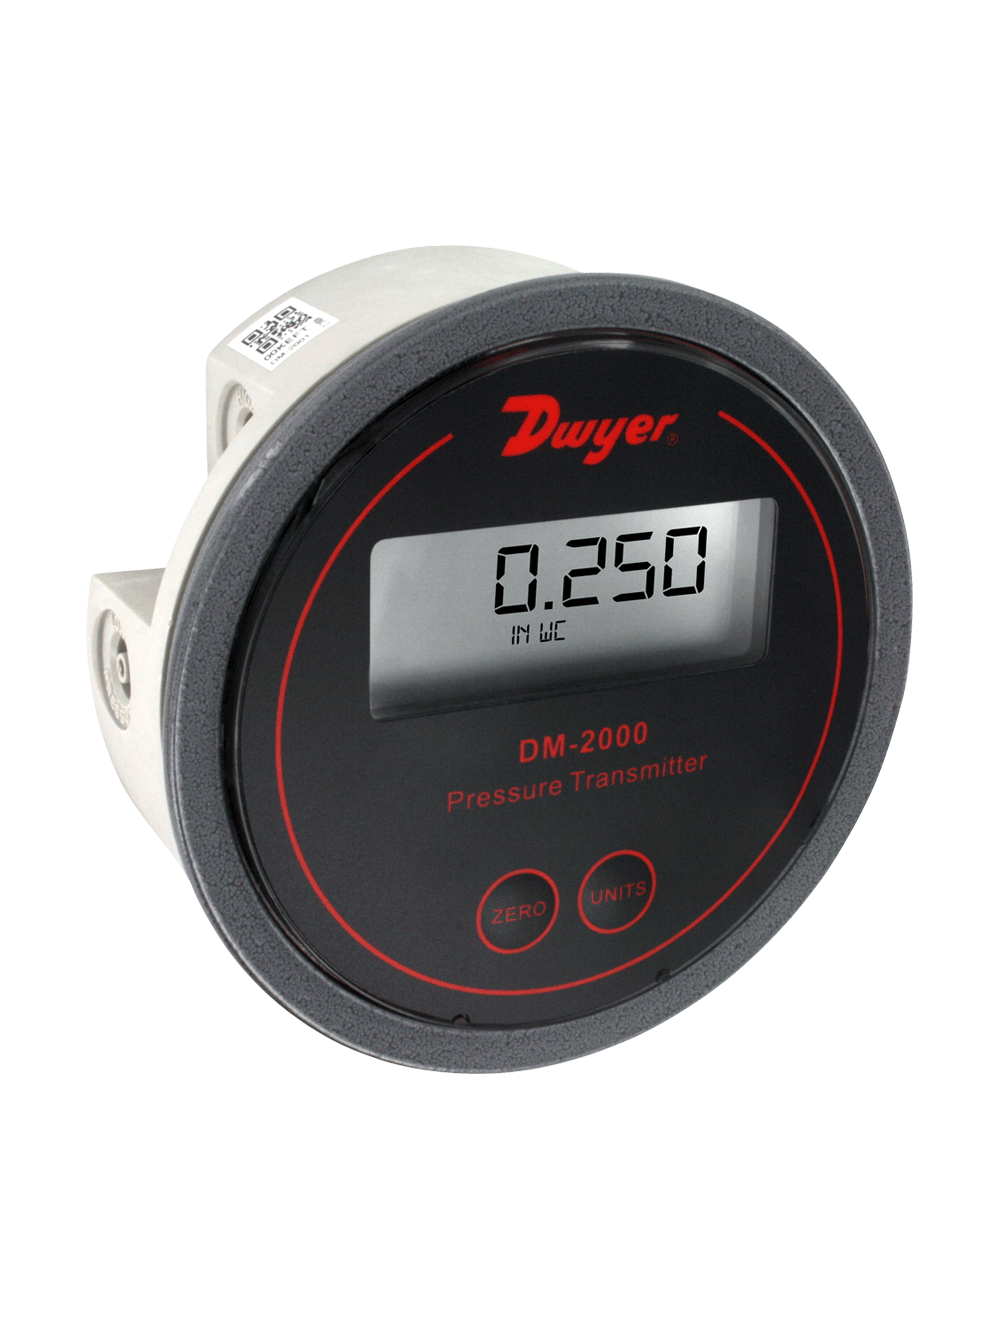 Dwyer Series DM-2000 Differential Pressure Transmitter with LCD 0-0.1WC Black Background 